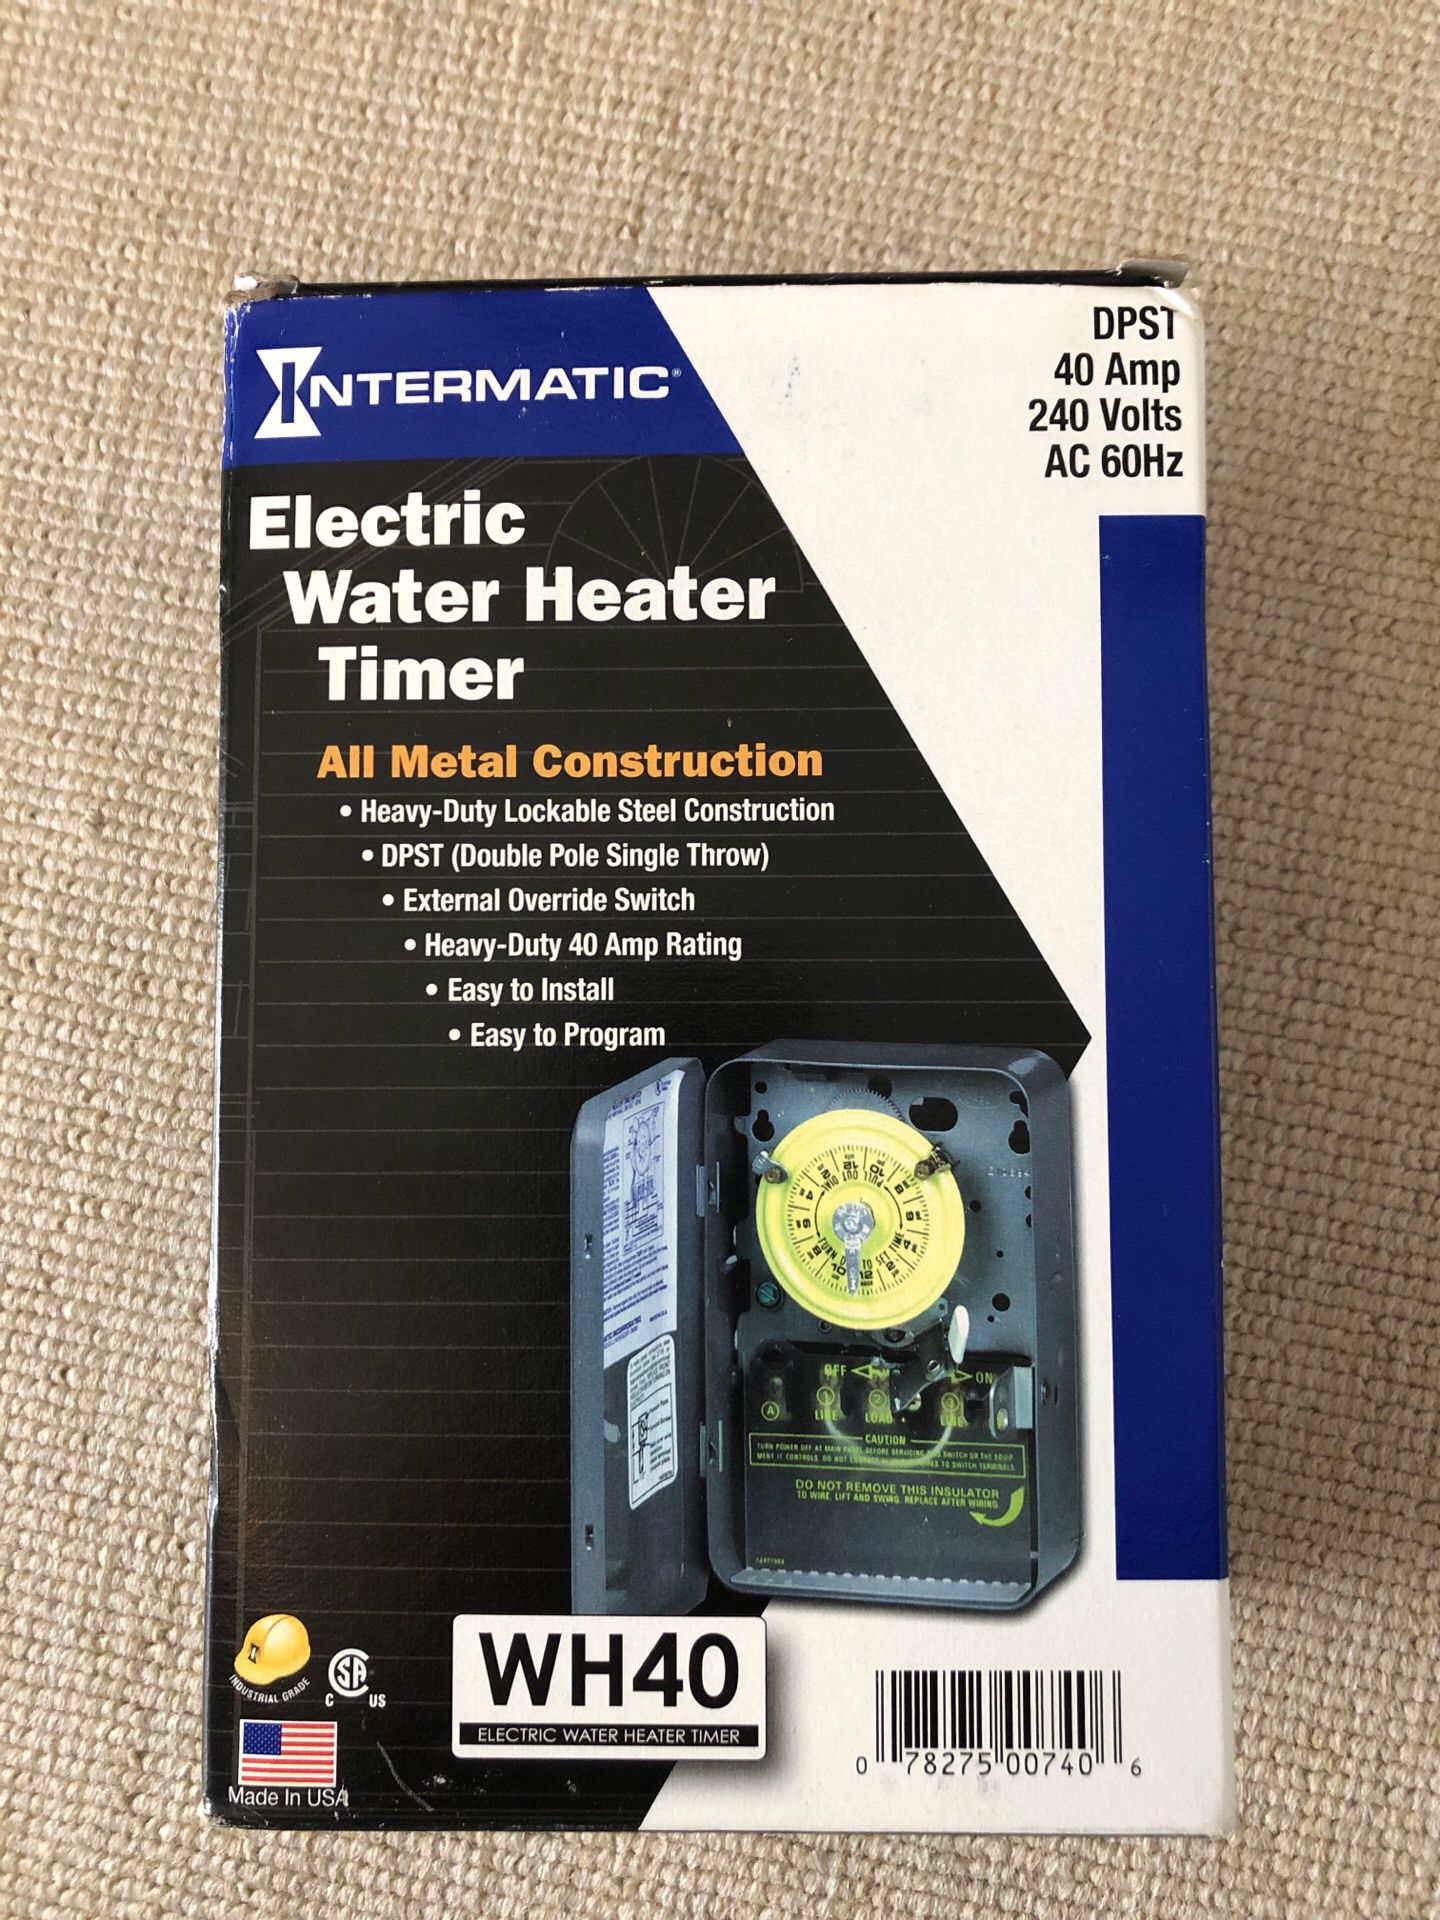 Electric water heater timer